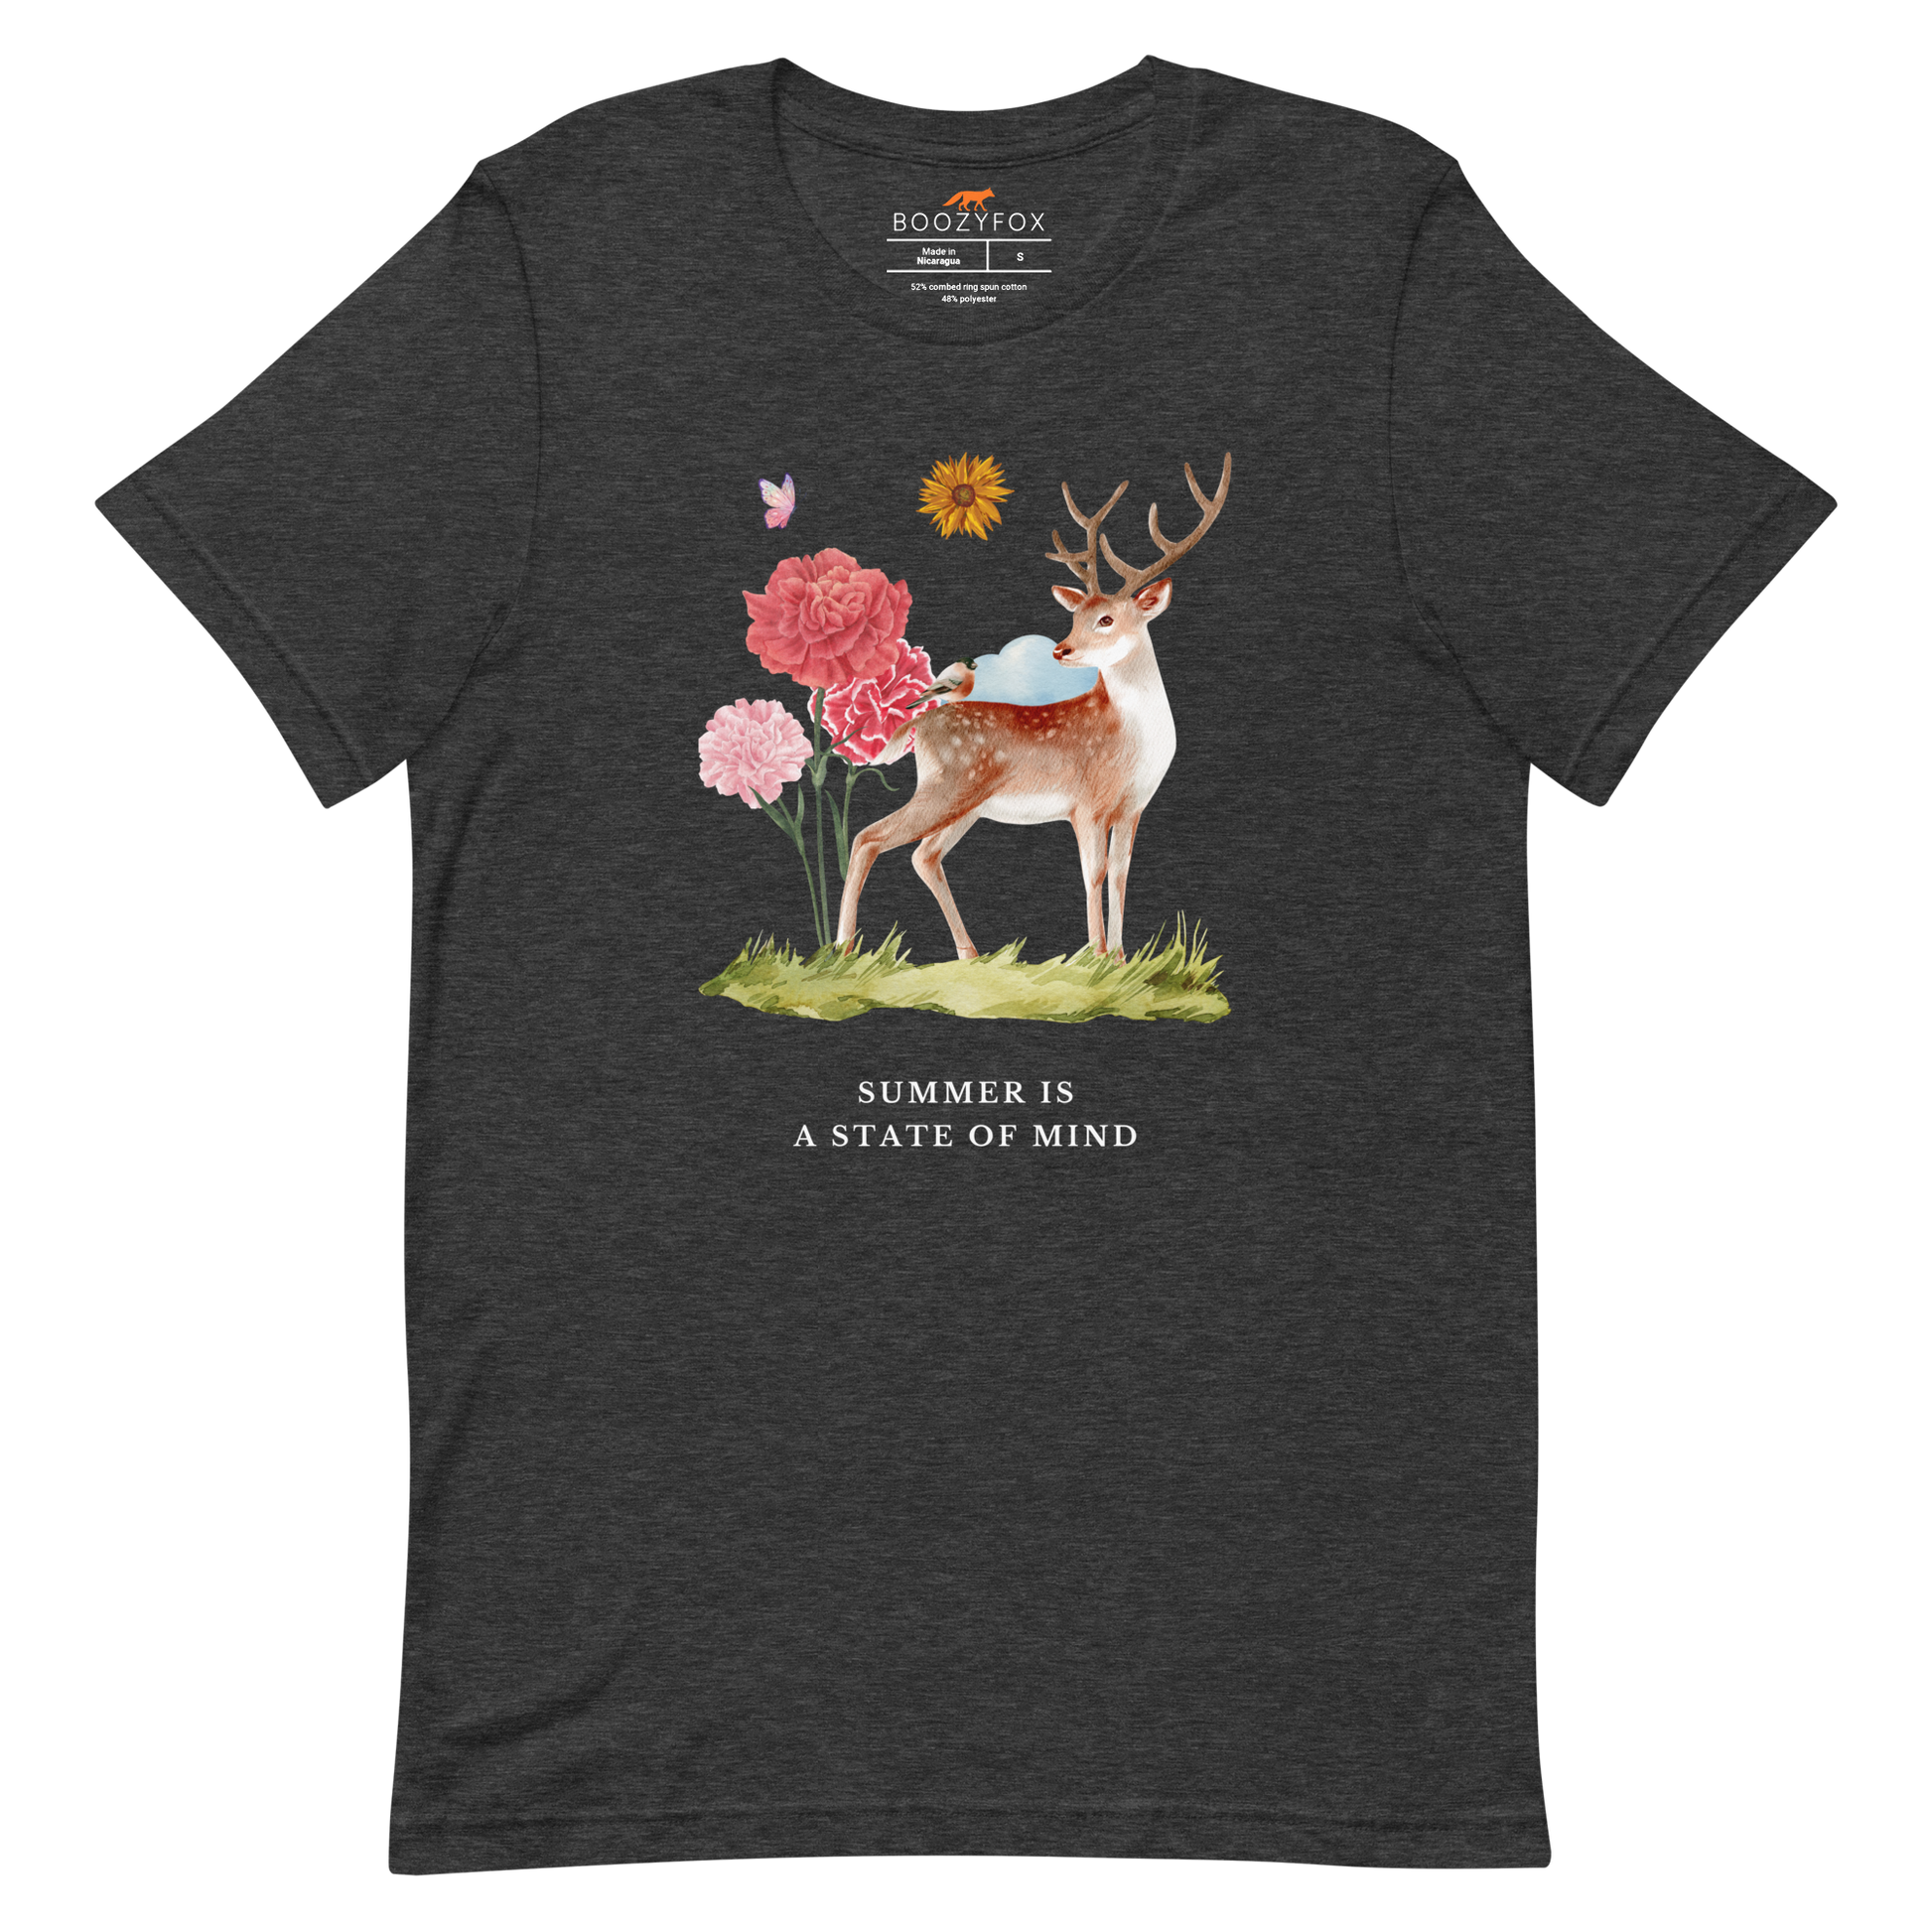 Dark Grey Heather Premium Summer Is a State of Mind Tee featuring a Summer Is a State of Mind graphic on the chest - Cute Graphic Summer Tees - Boozy Fox